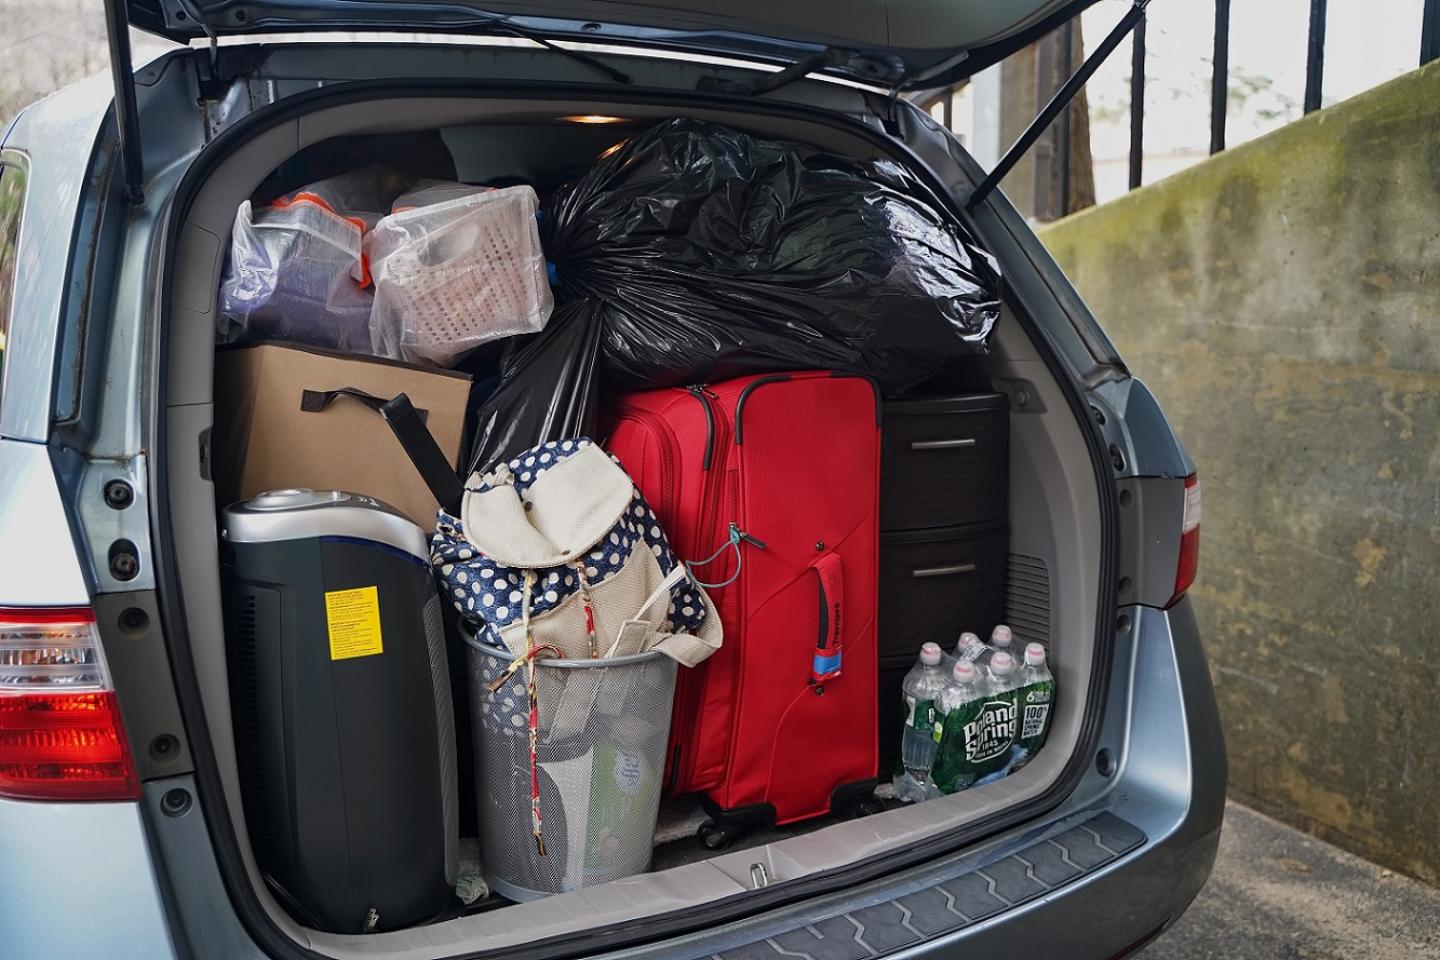 Car with packed trunk on move-in day